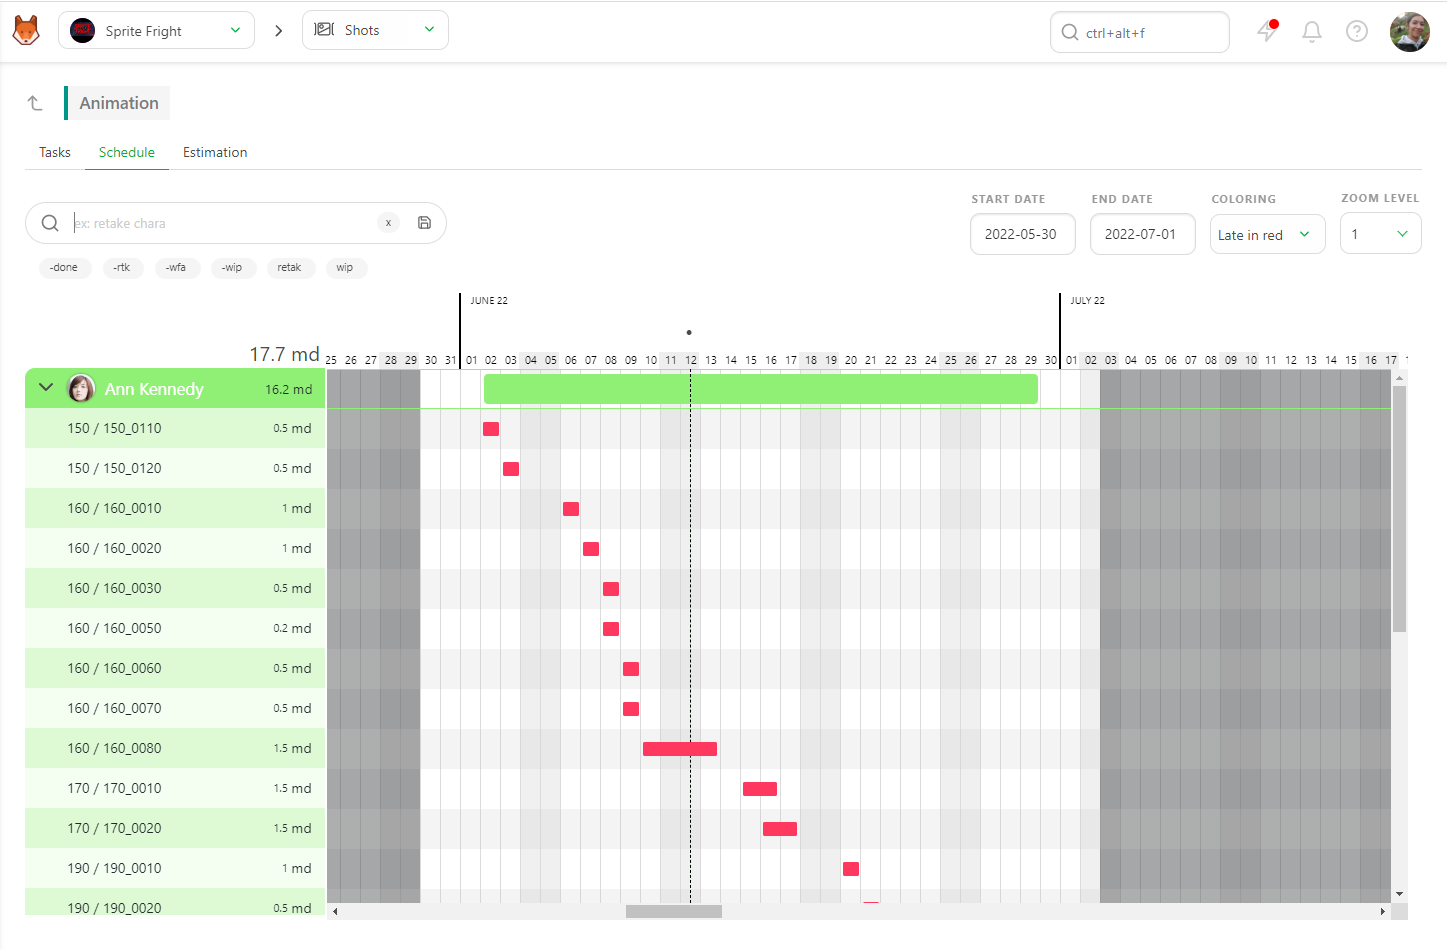 Task type page schedule coloring late in red